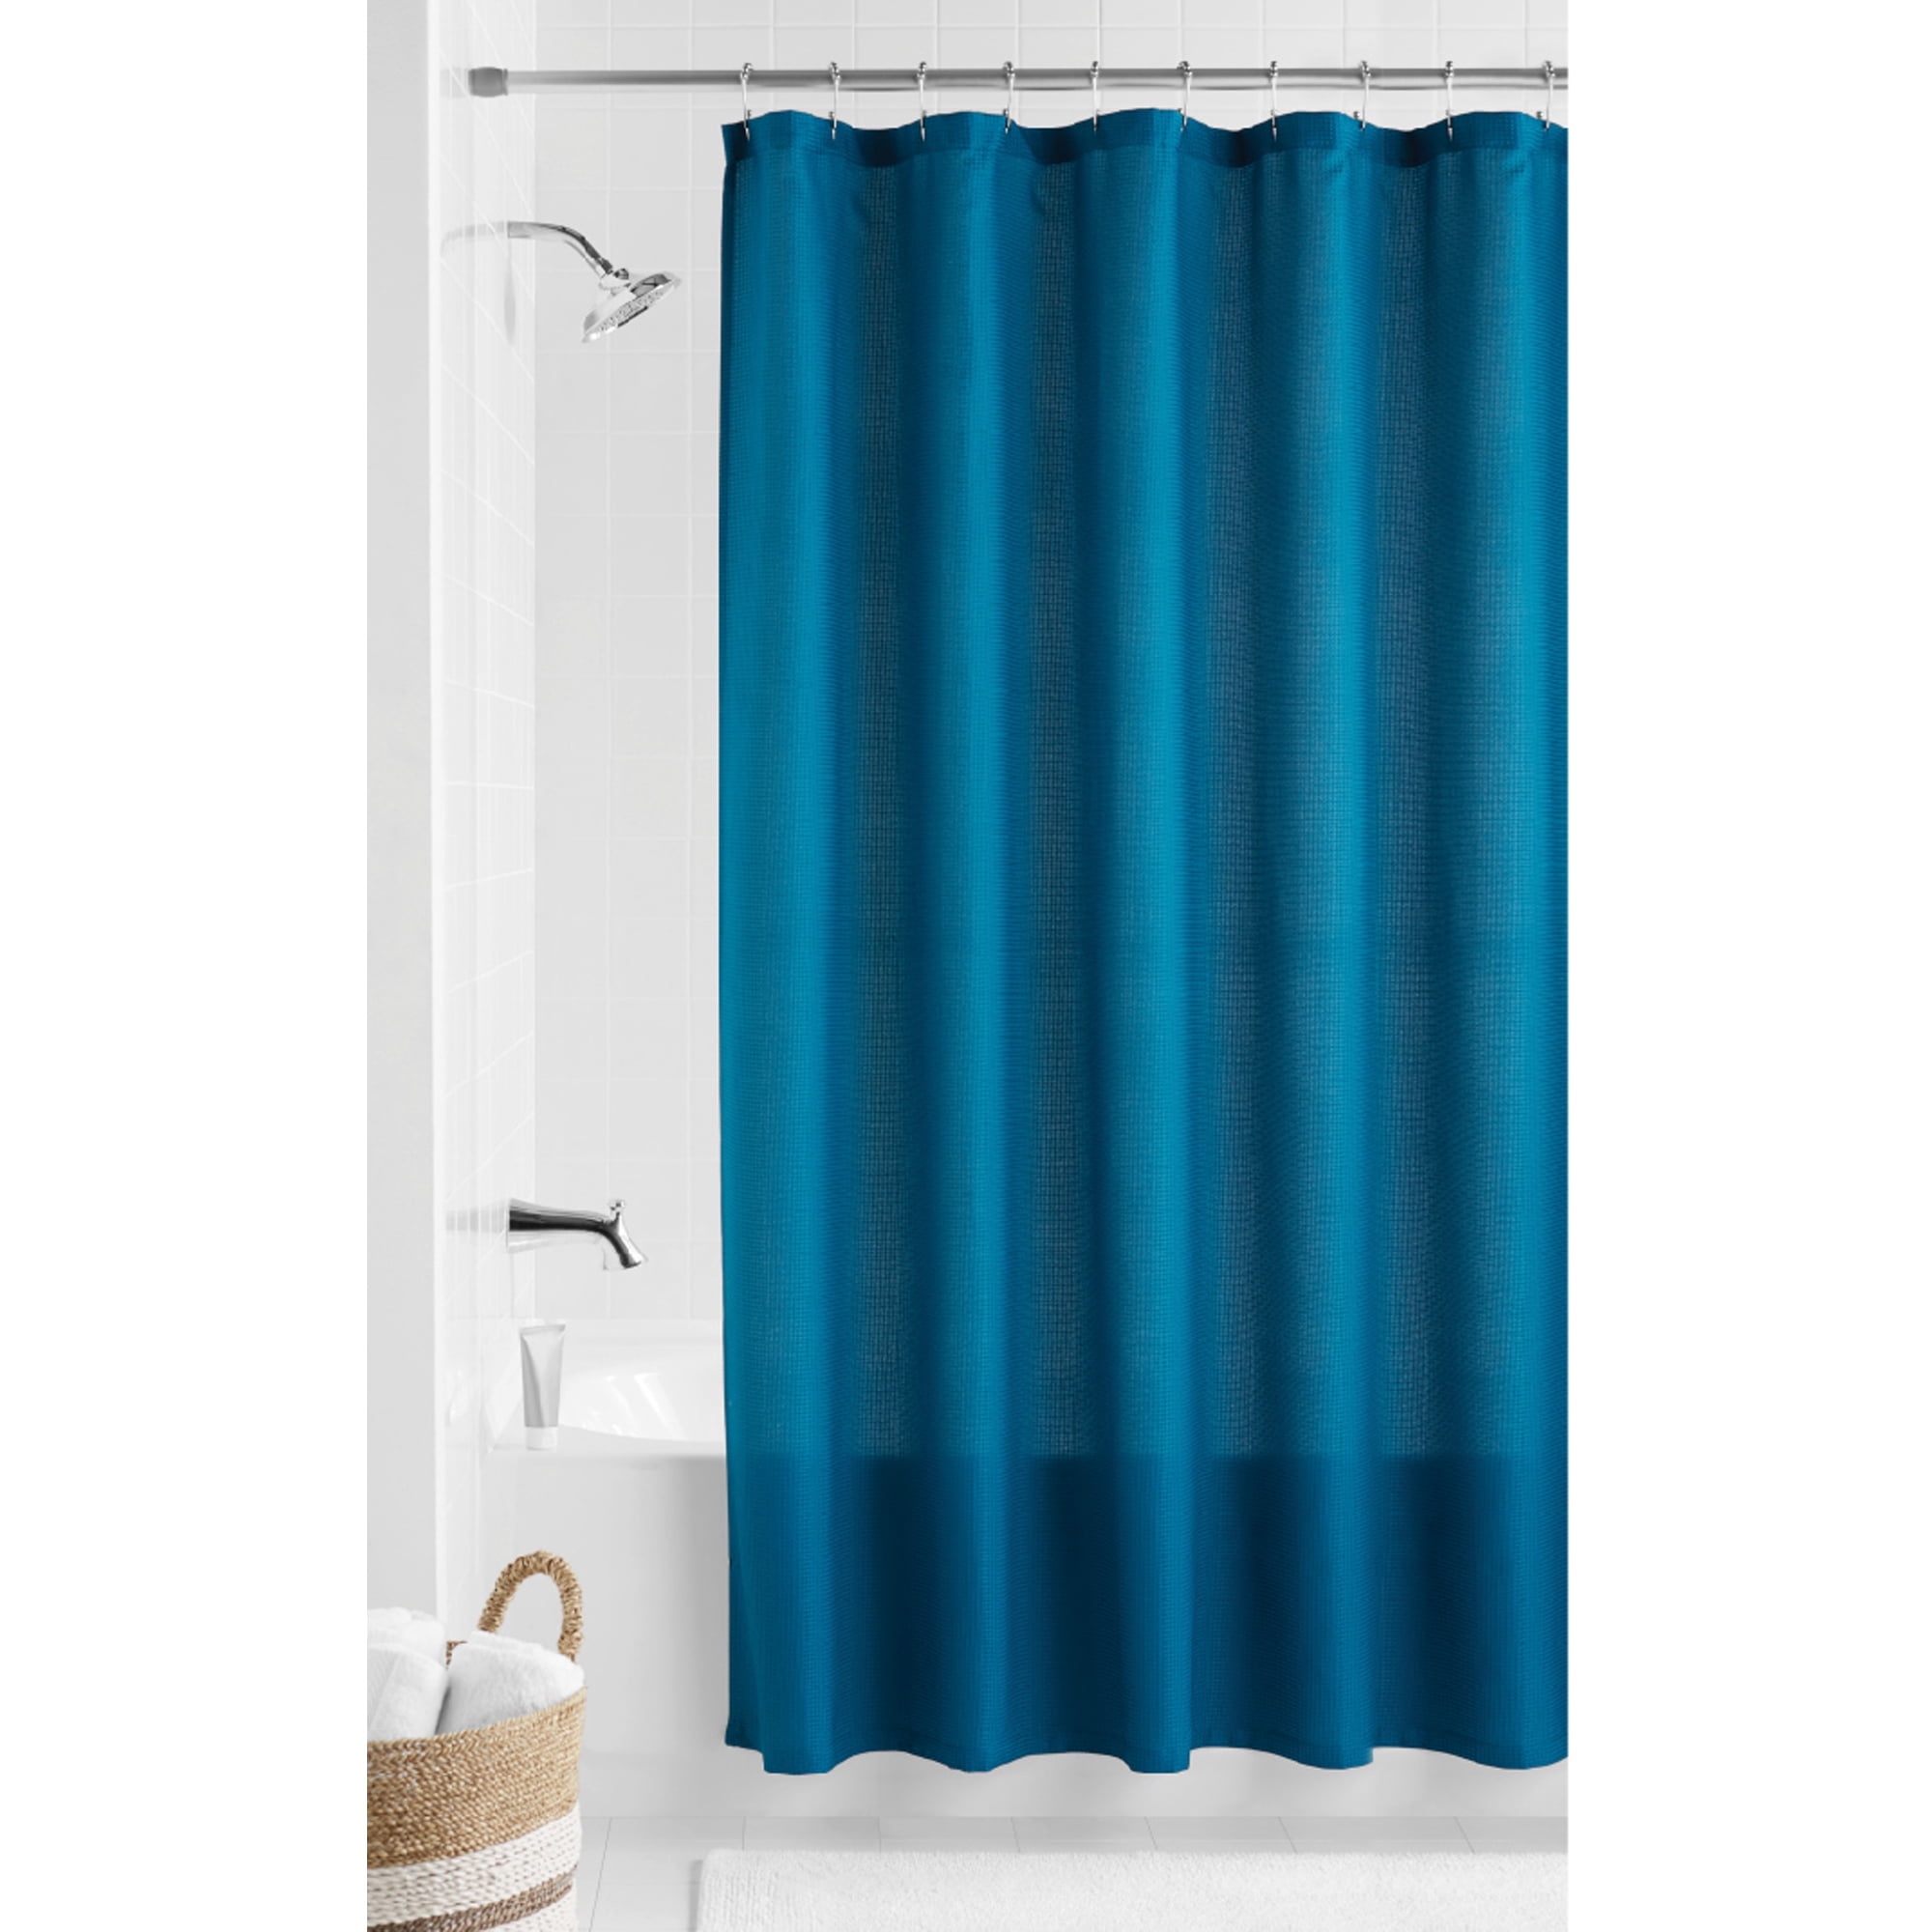 Mainstays Teal Waffle Textured Fabric Shower Curtain 70" x 72" Blue 